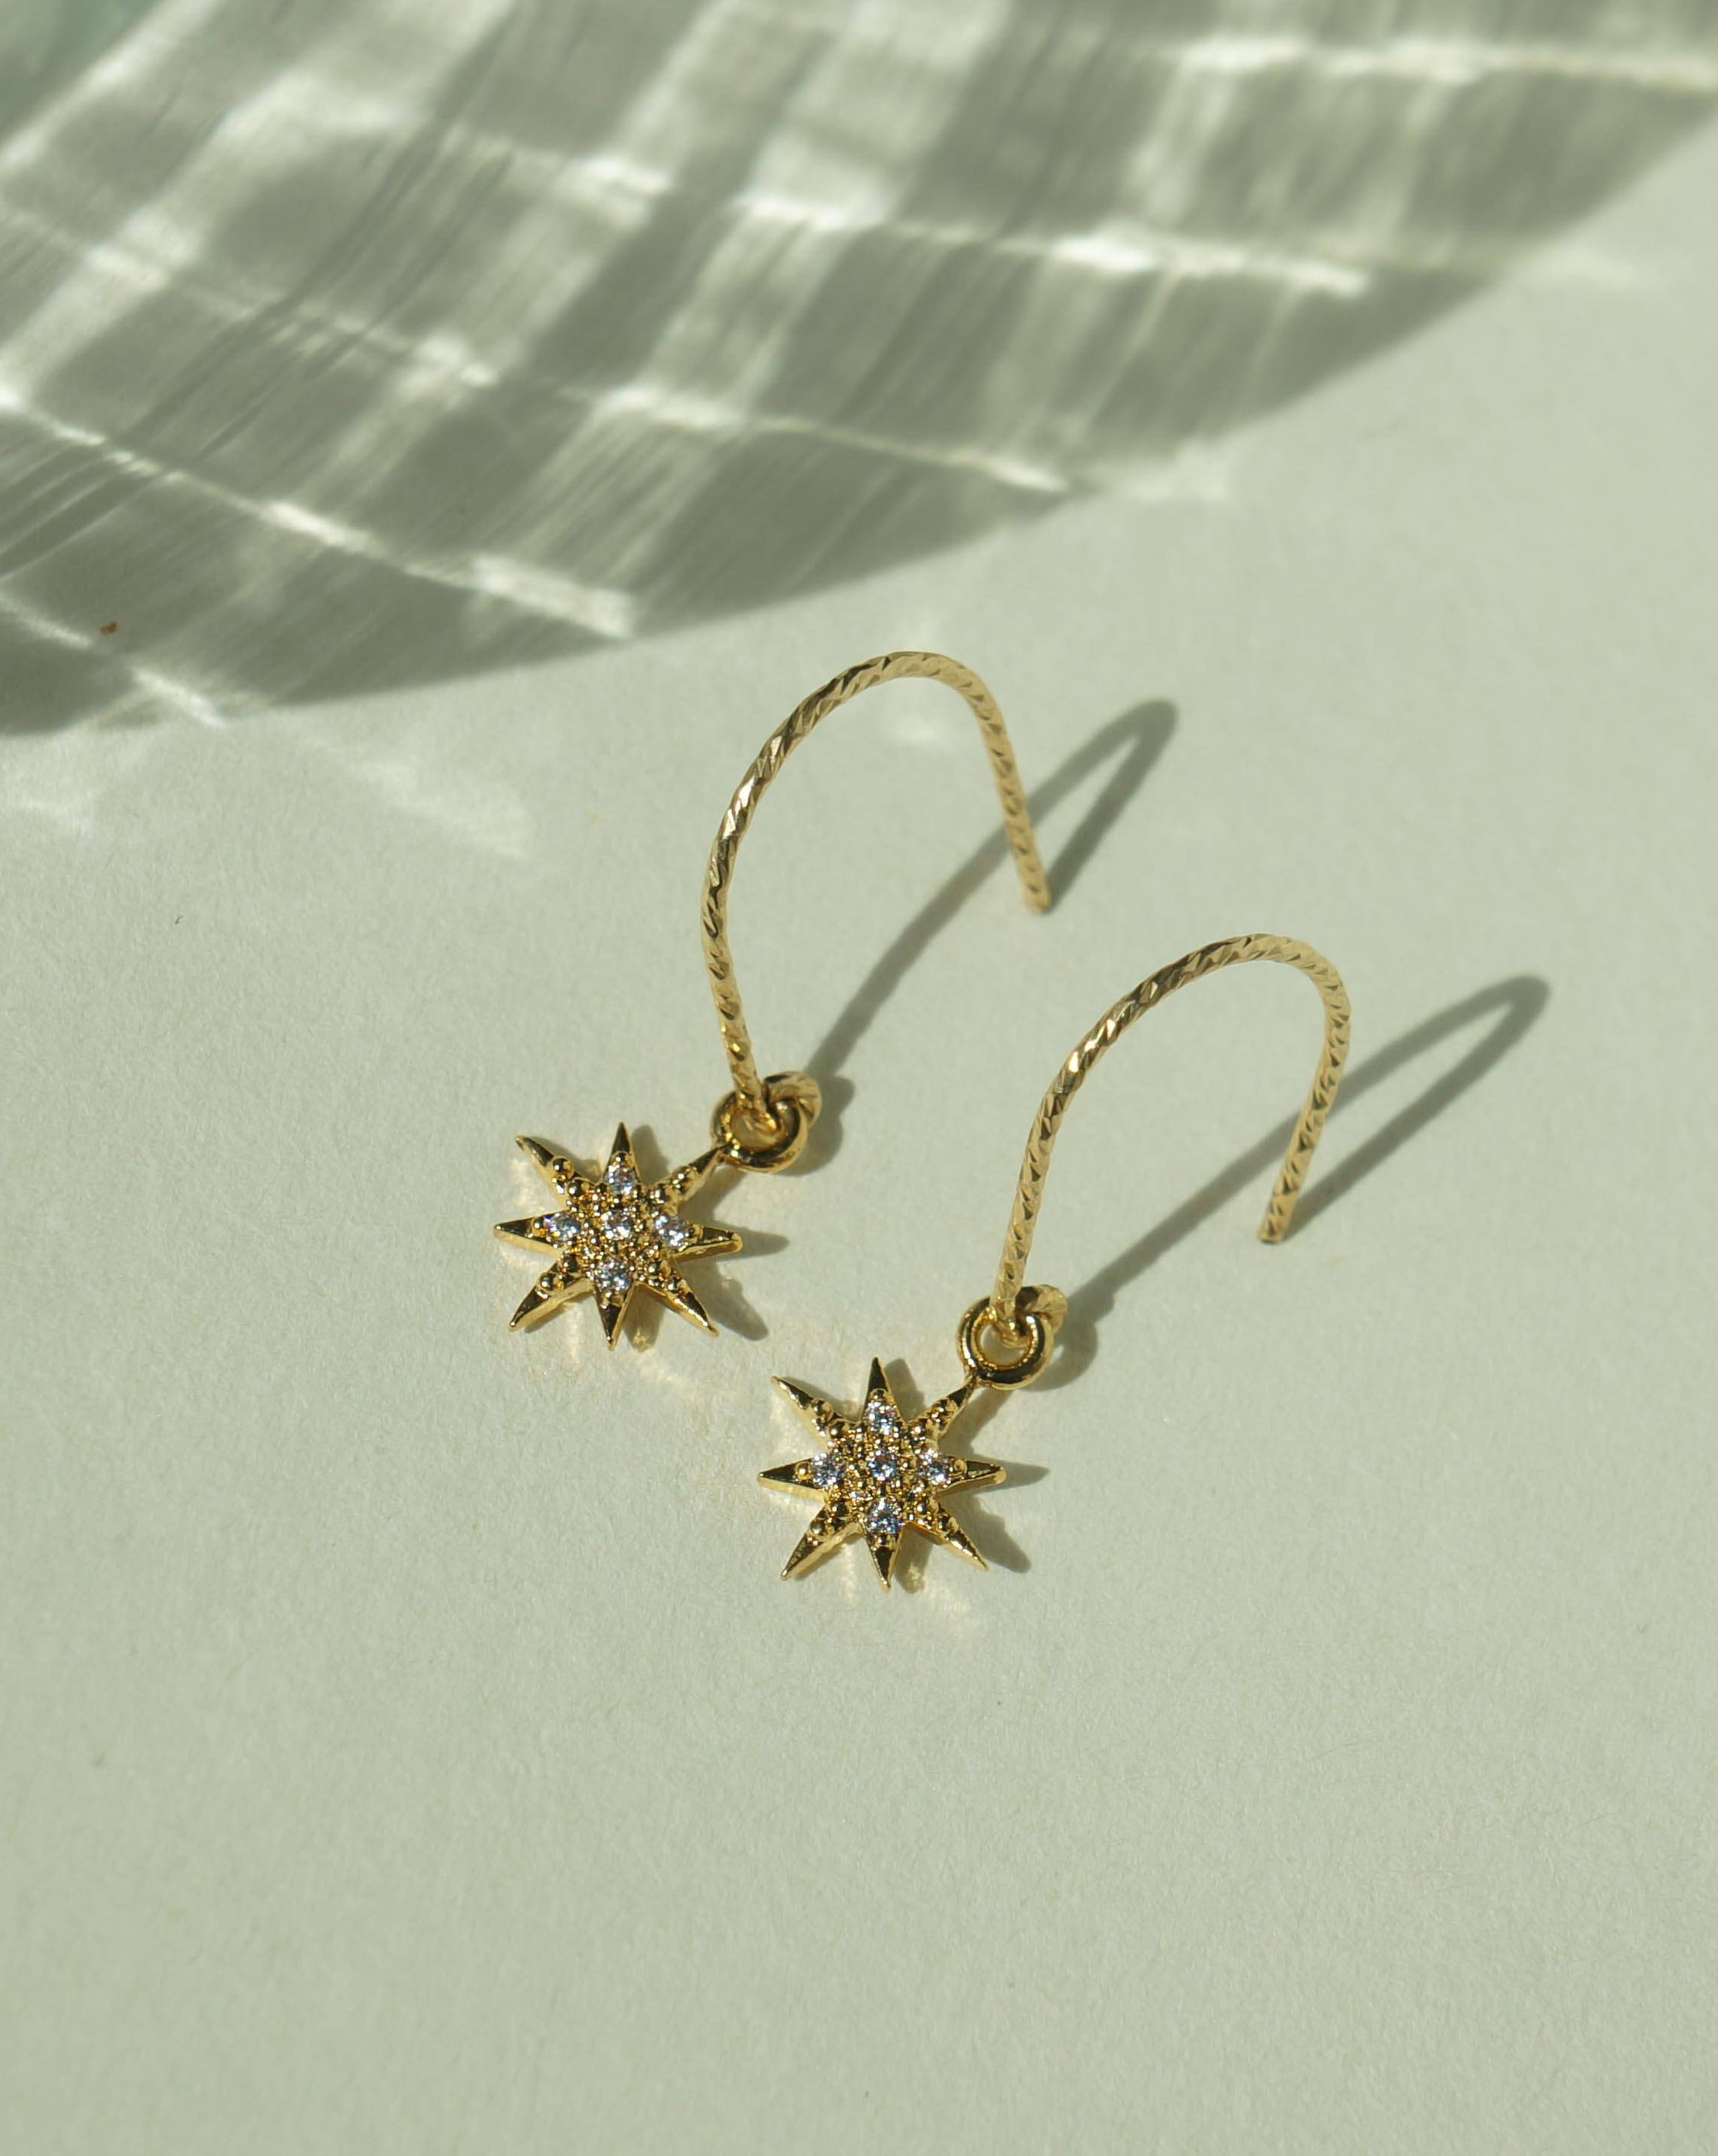 You Star Earrings by KOZAKH. Diamond textured hook earrings, crafted in 14K Gold Filled, featuring a Cubic Zirconia encrusted 8 point star charm.